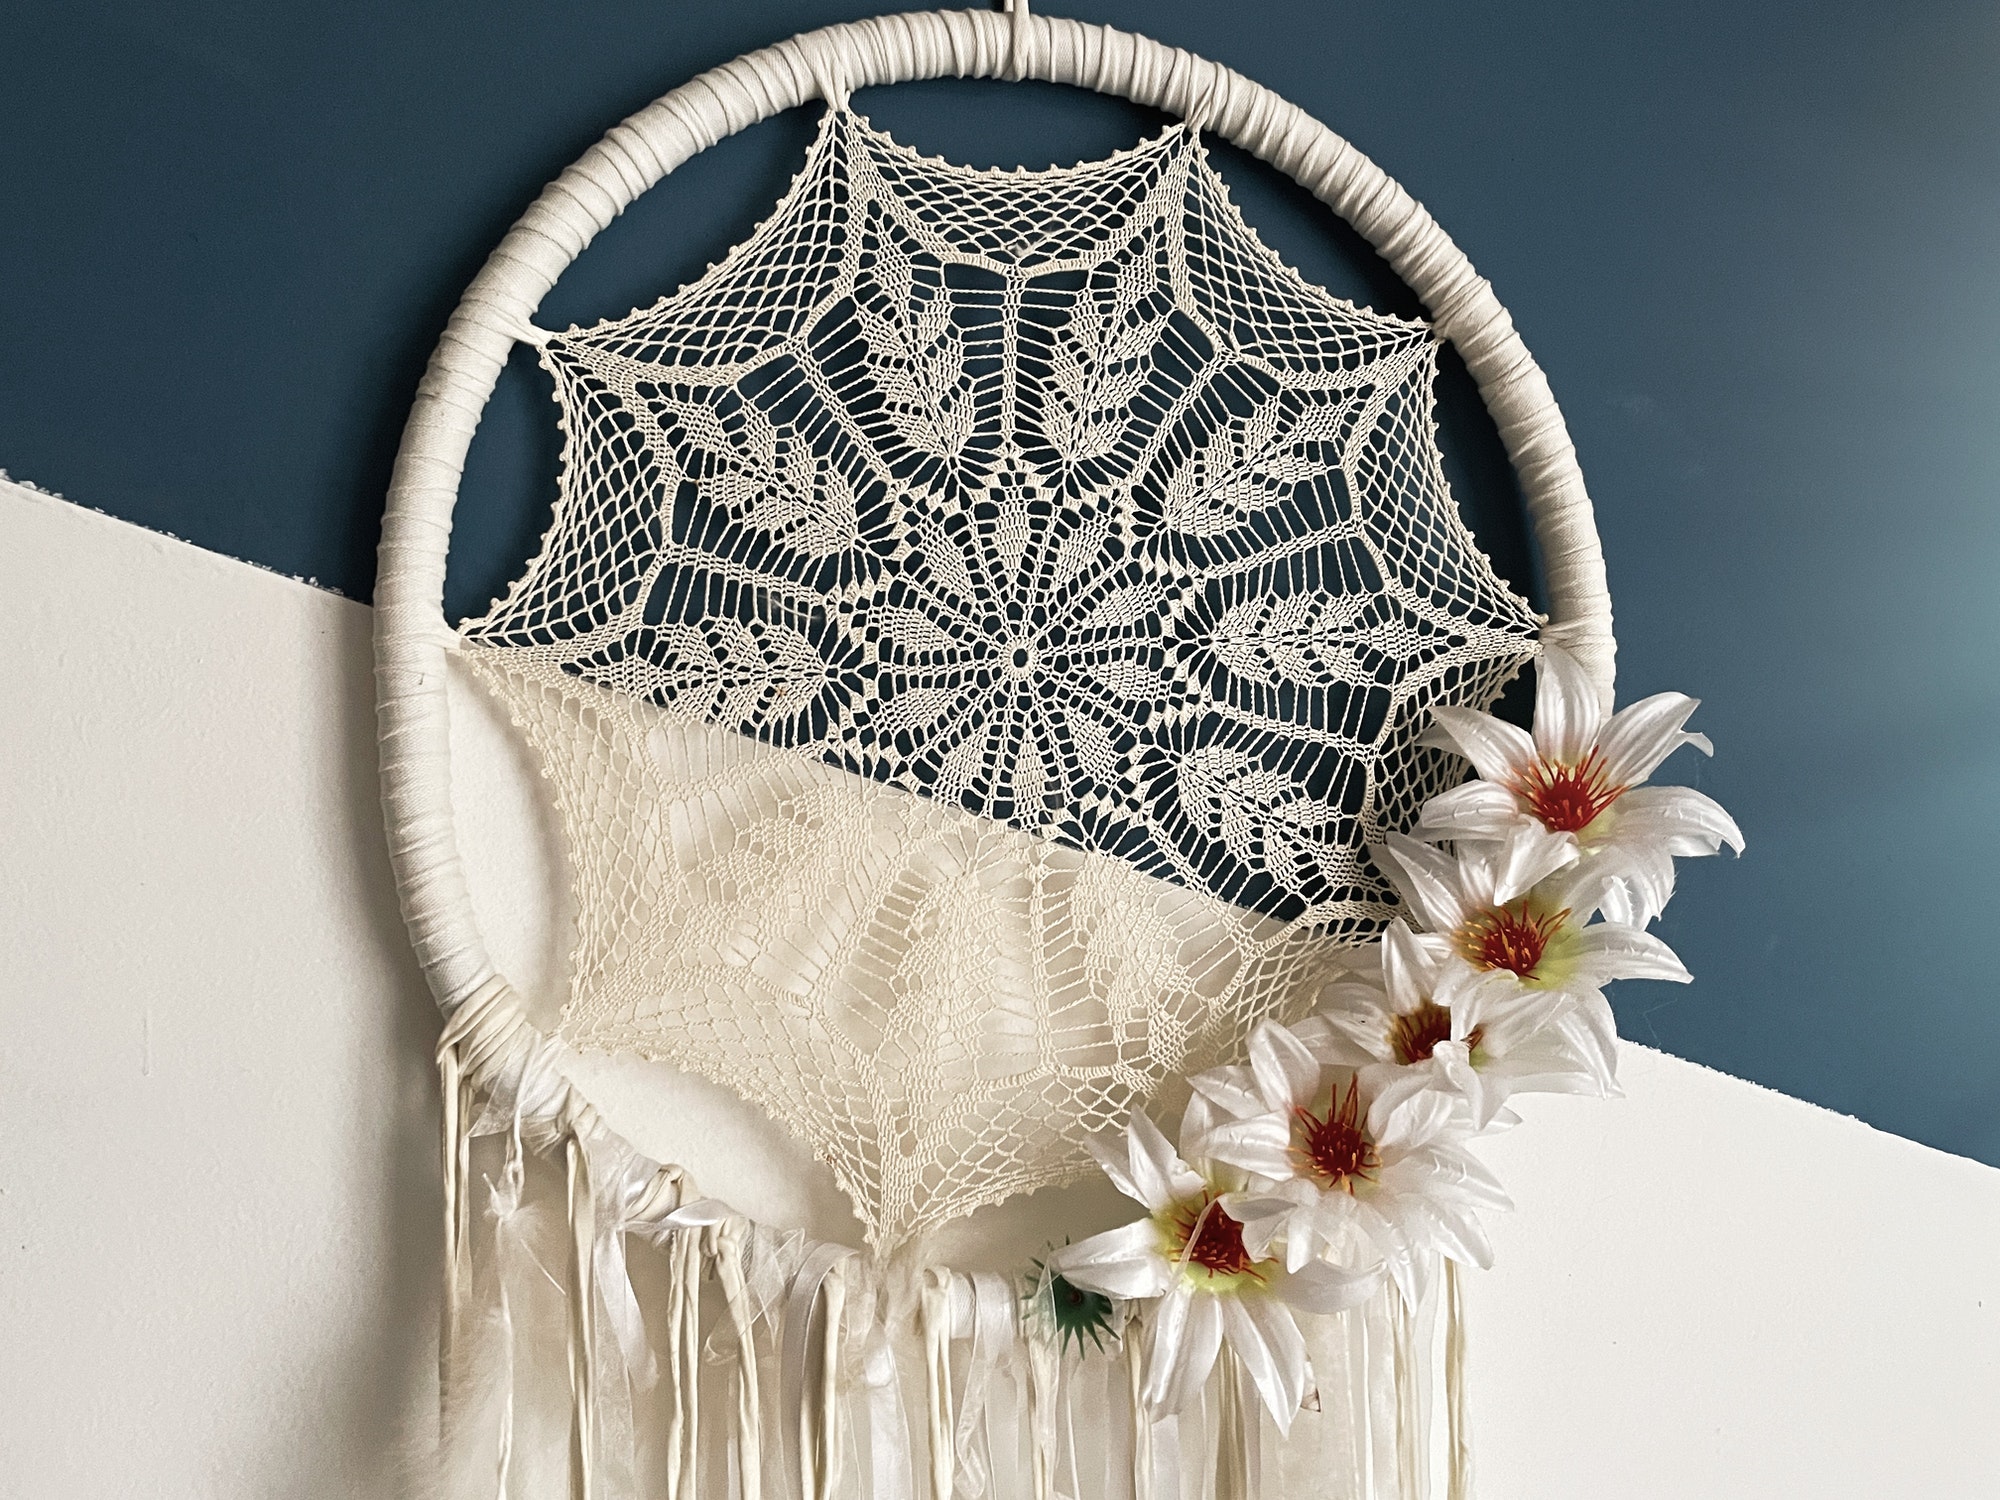 Dreamcatcher on wall over bed, decorated bed room with Native American decoration